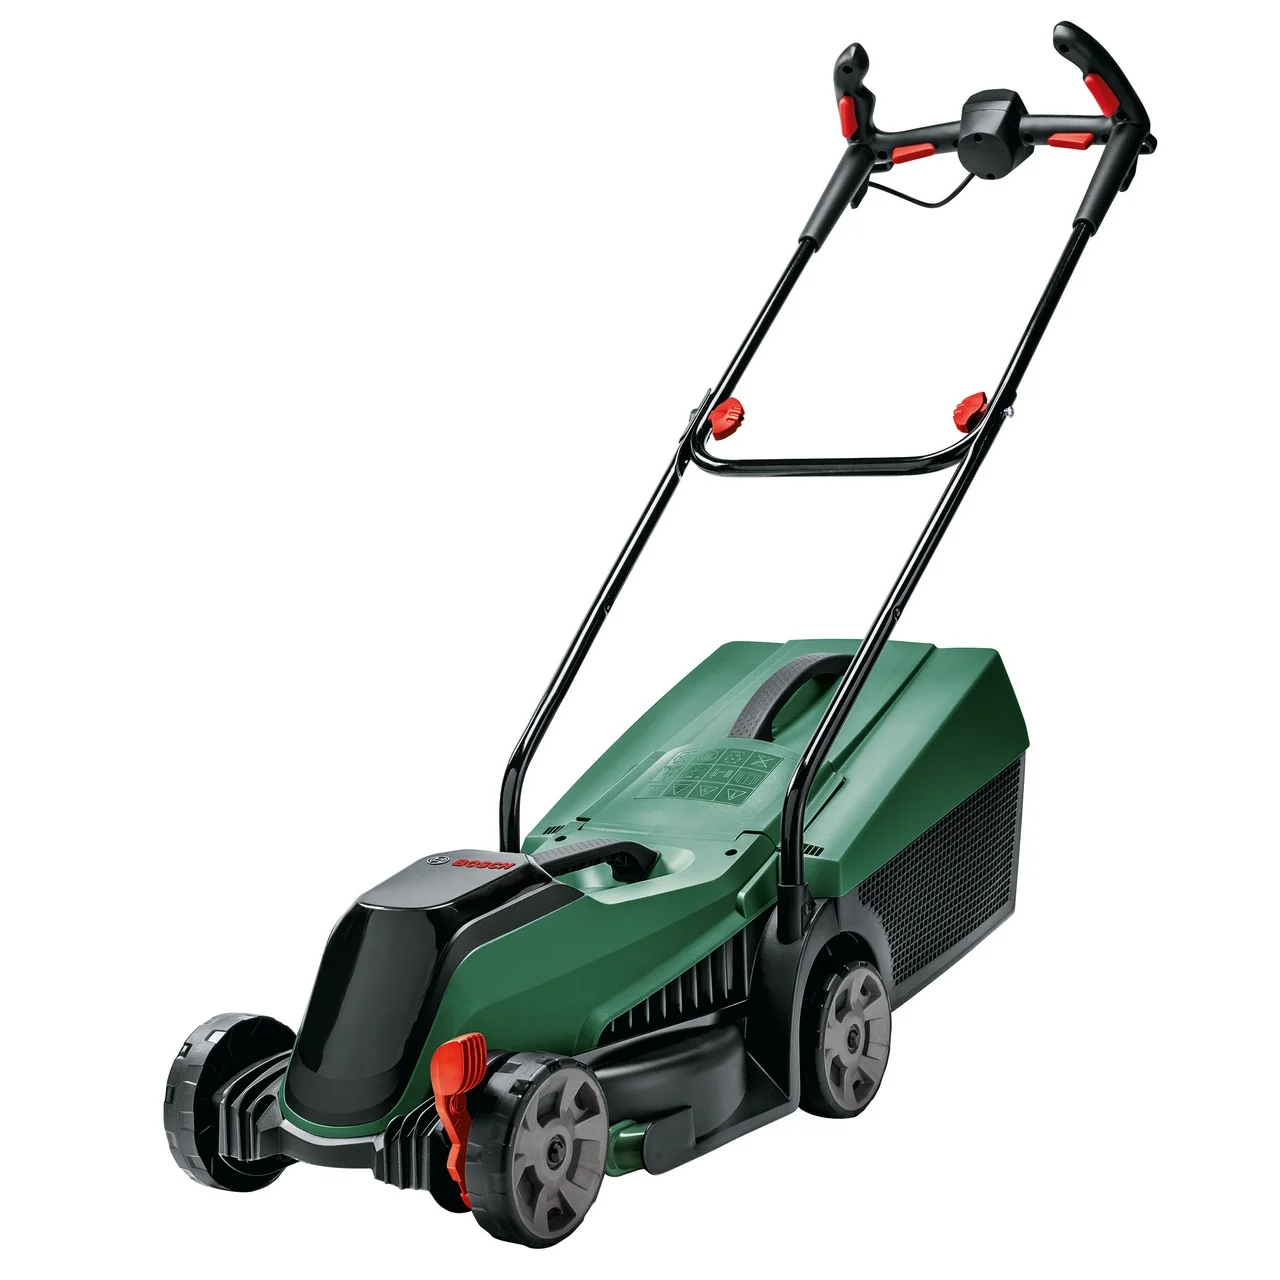 Image of Bosch <br><strong>CityMower 18V Lawnmower (4.0Ah Battery)</strong>